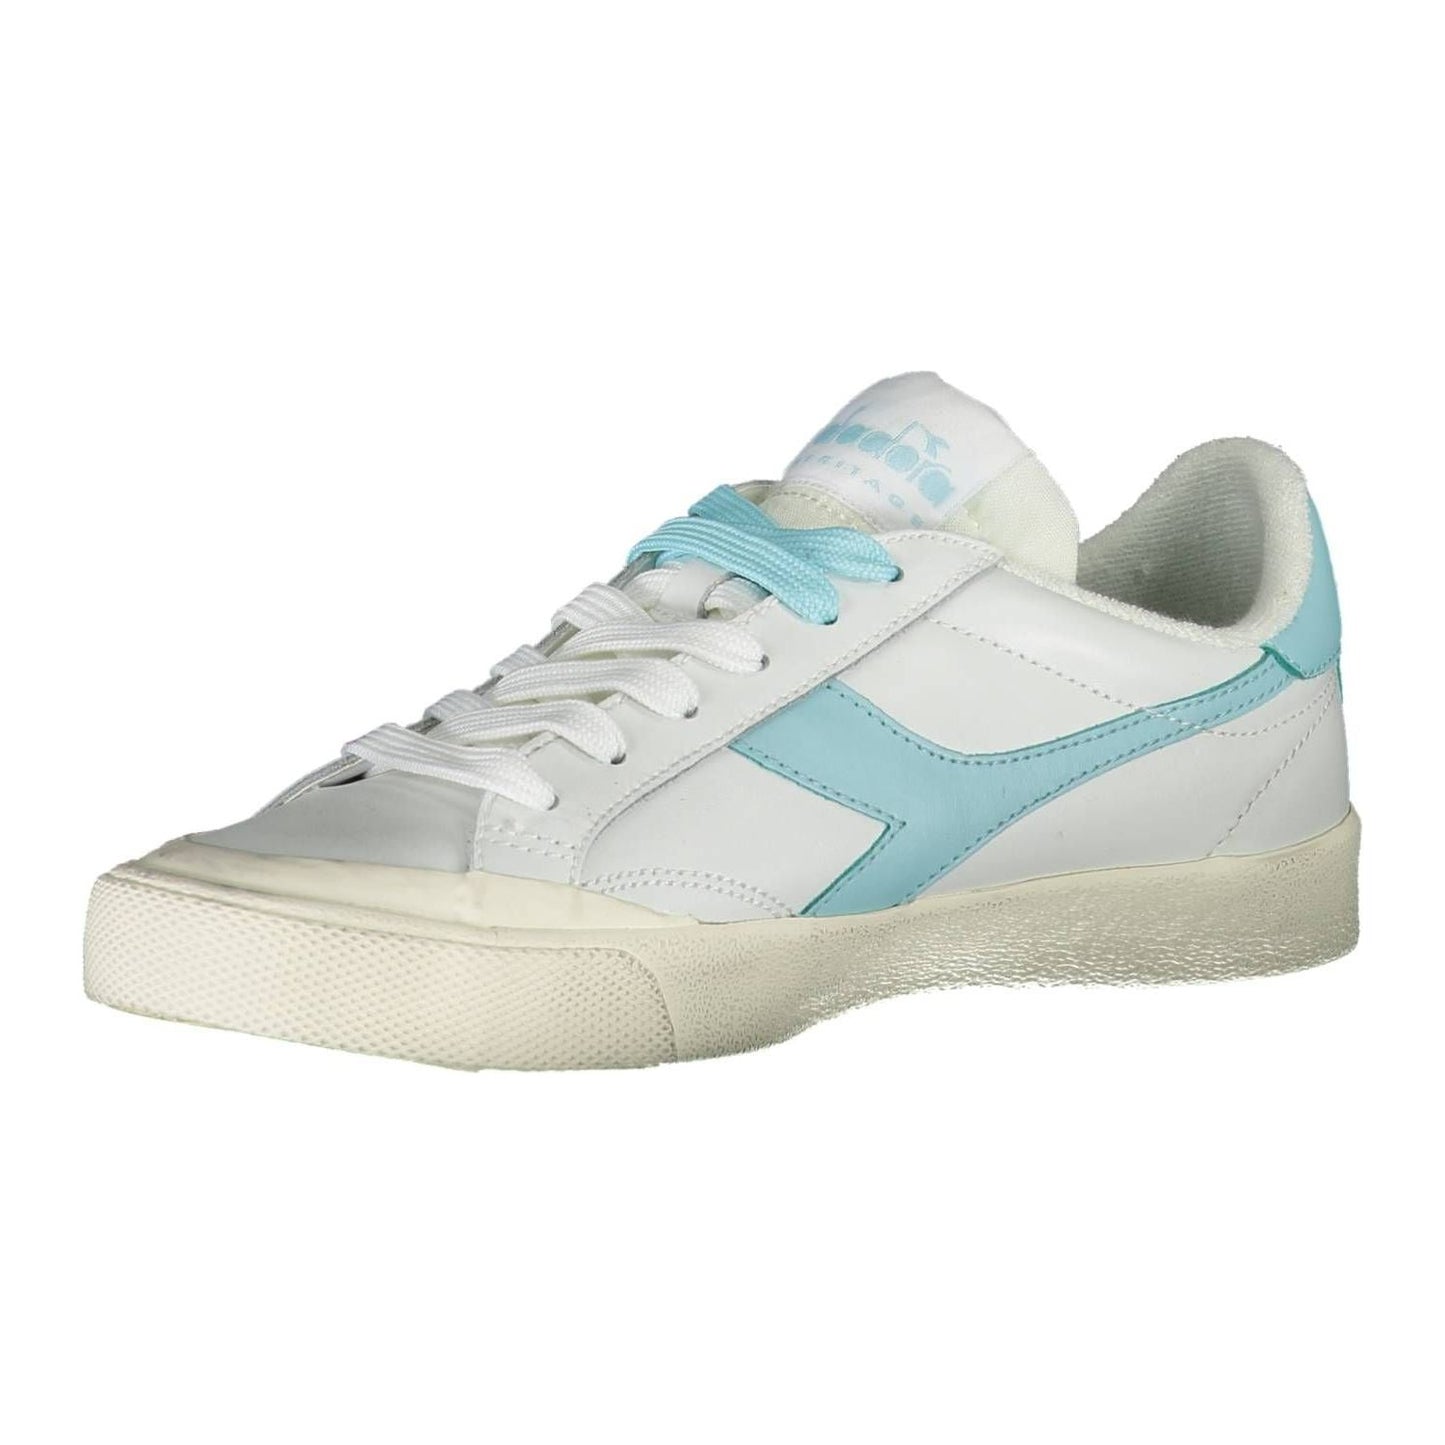 Diadora Chic White Lace-Up Sneakers with Contrasting Details chic-white-lace-up-sneakers-with-contrasting-details-1